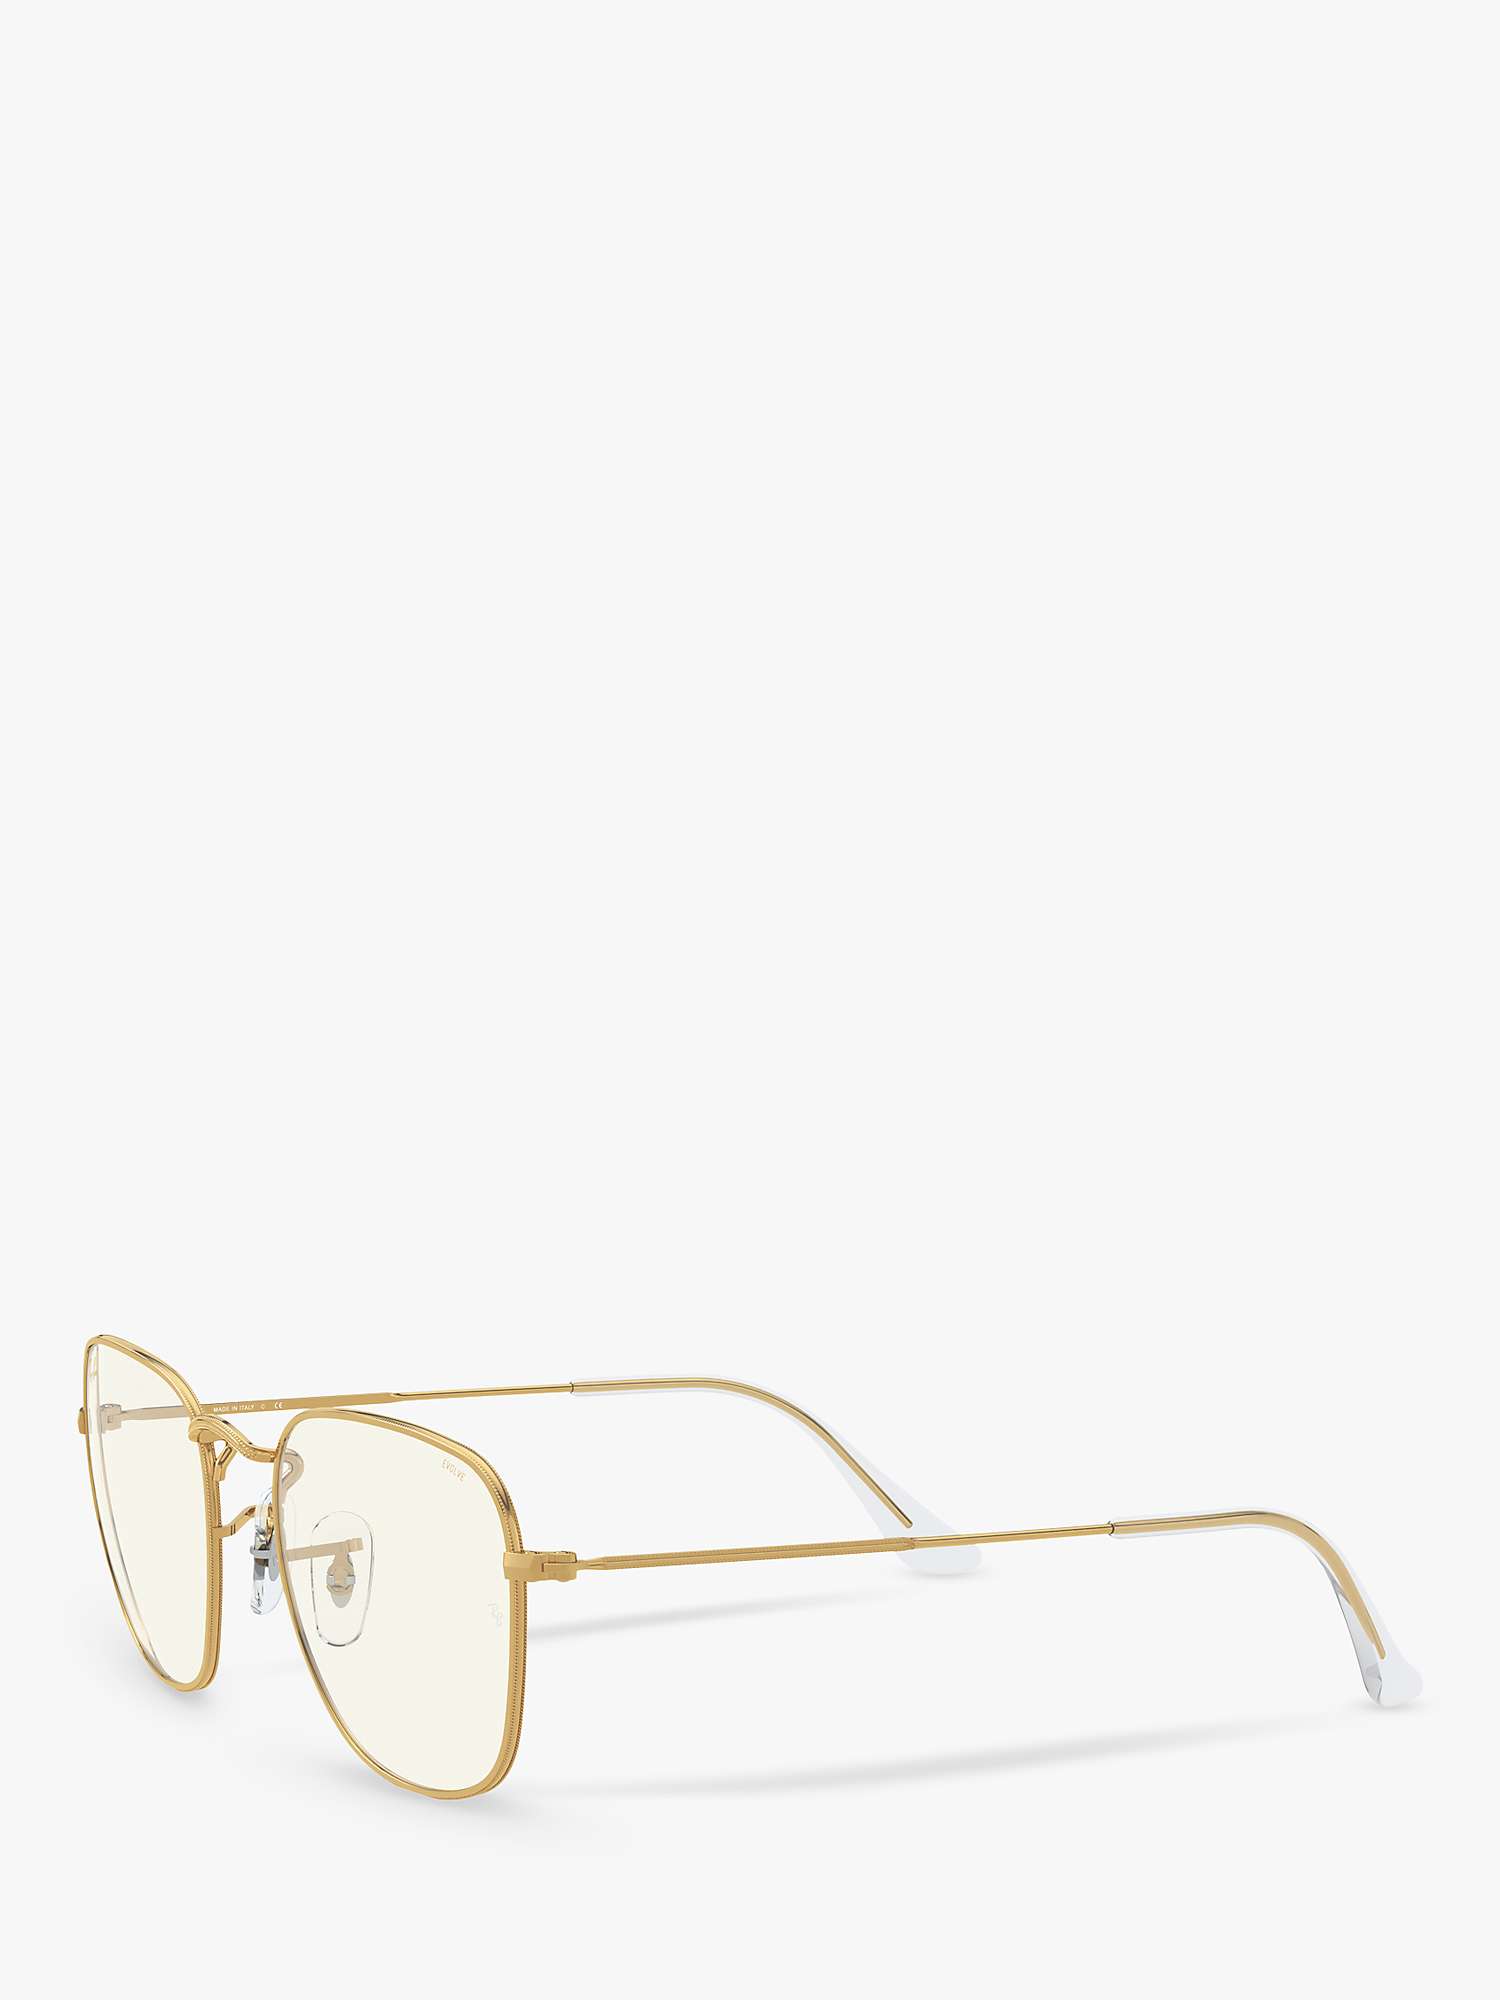 Buy Ray-Ban RB3857 Women's Square Sunglasses, Gold Online at johnlewis.com